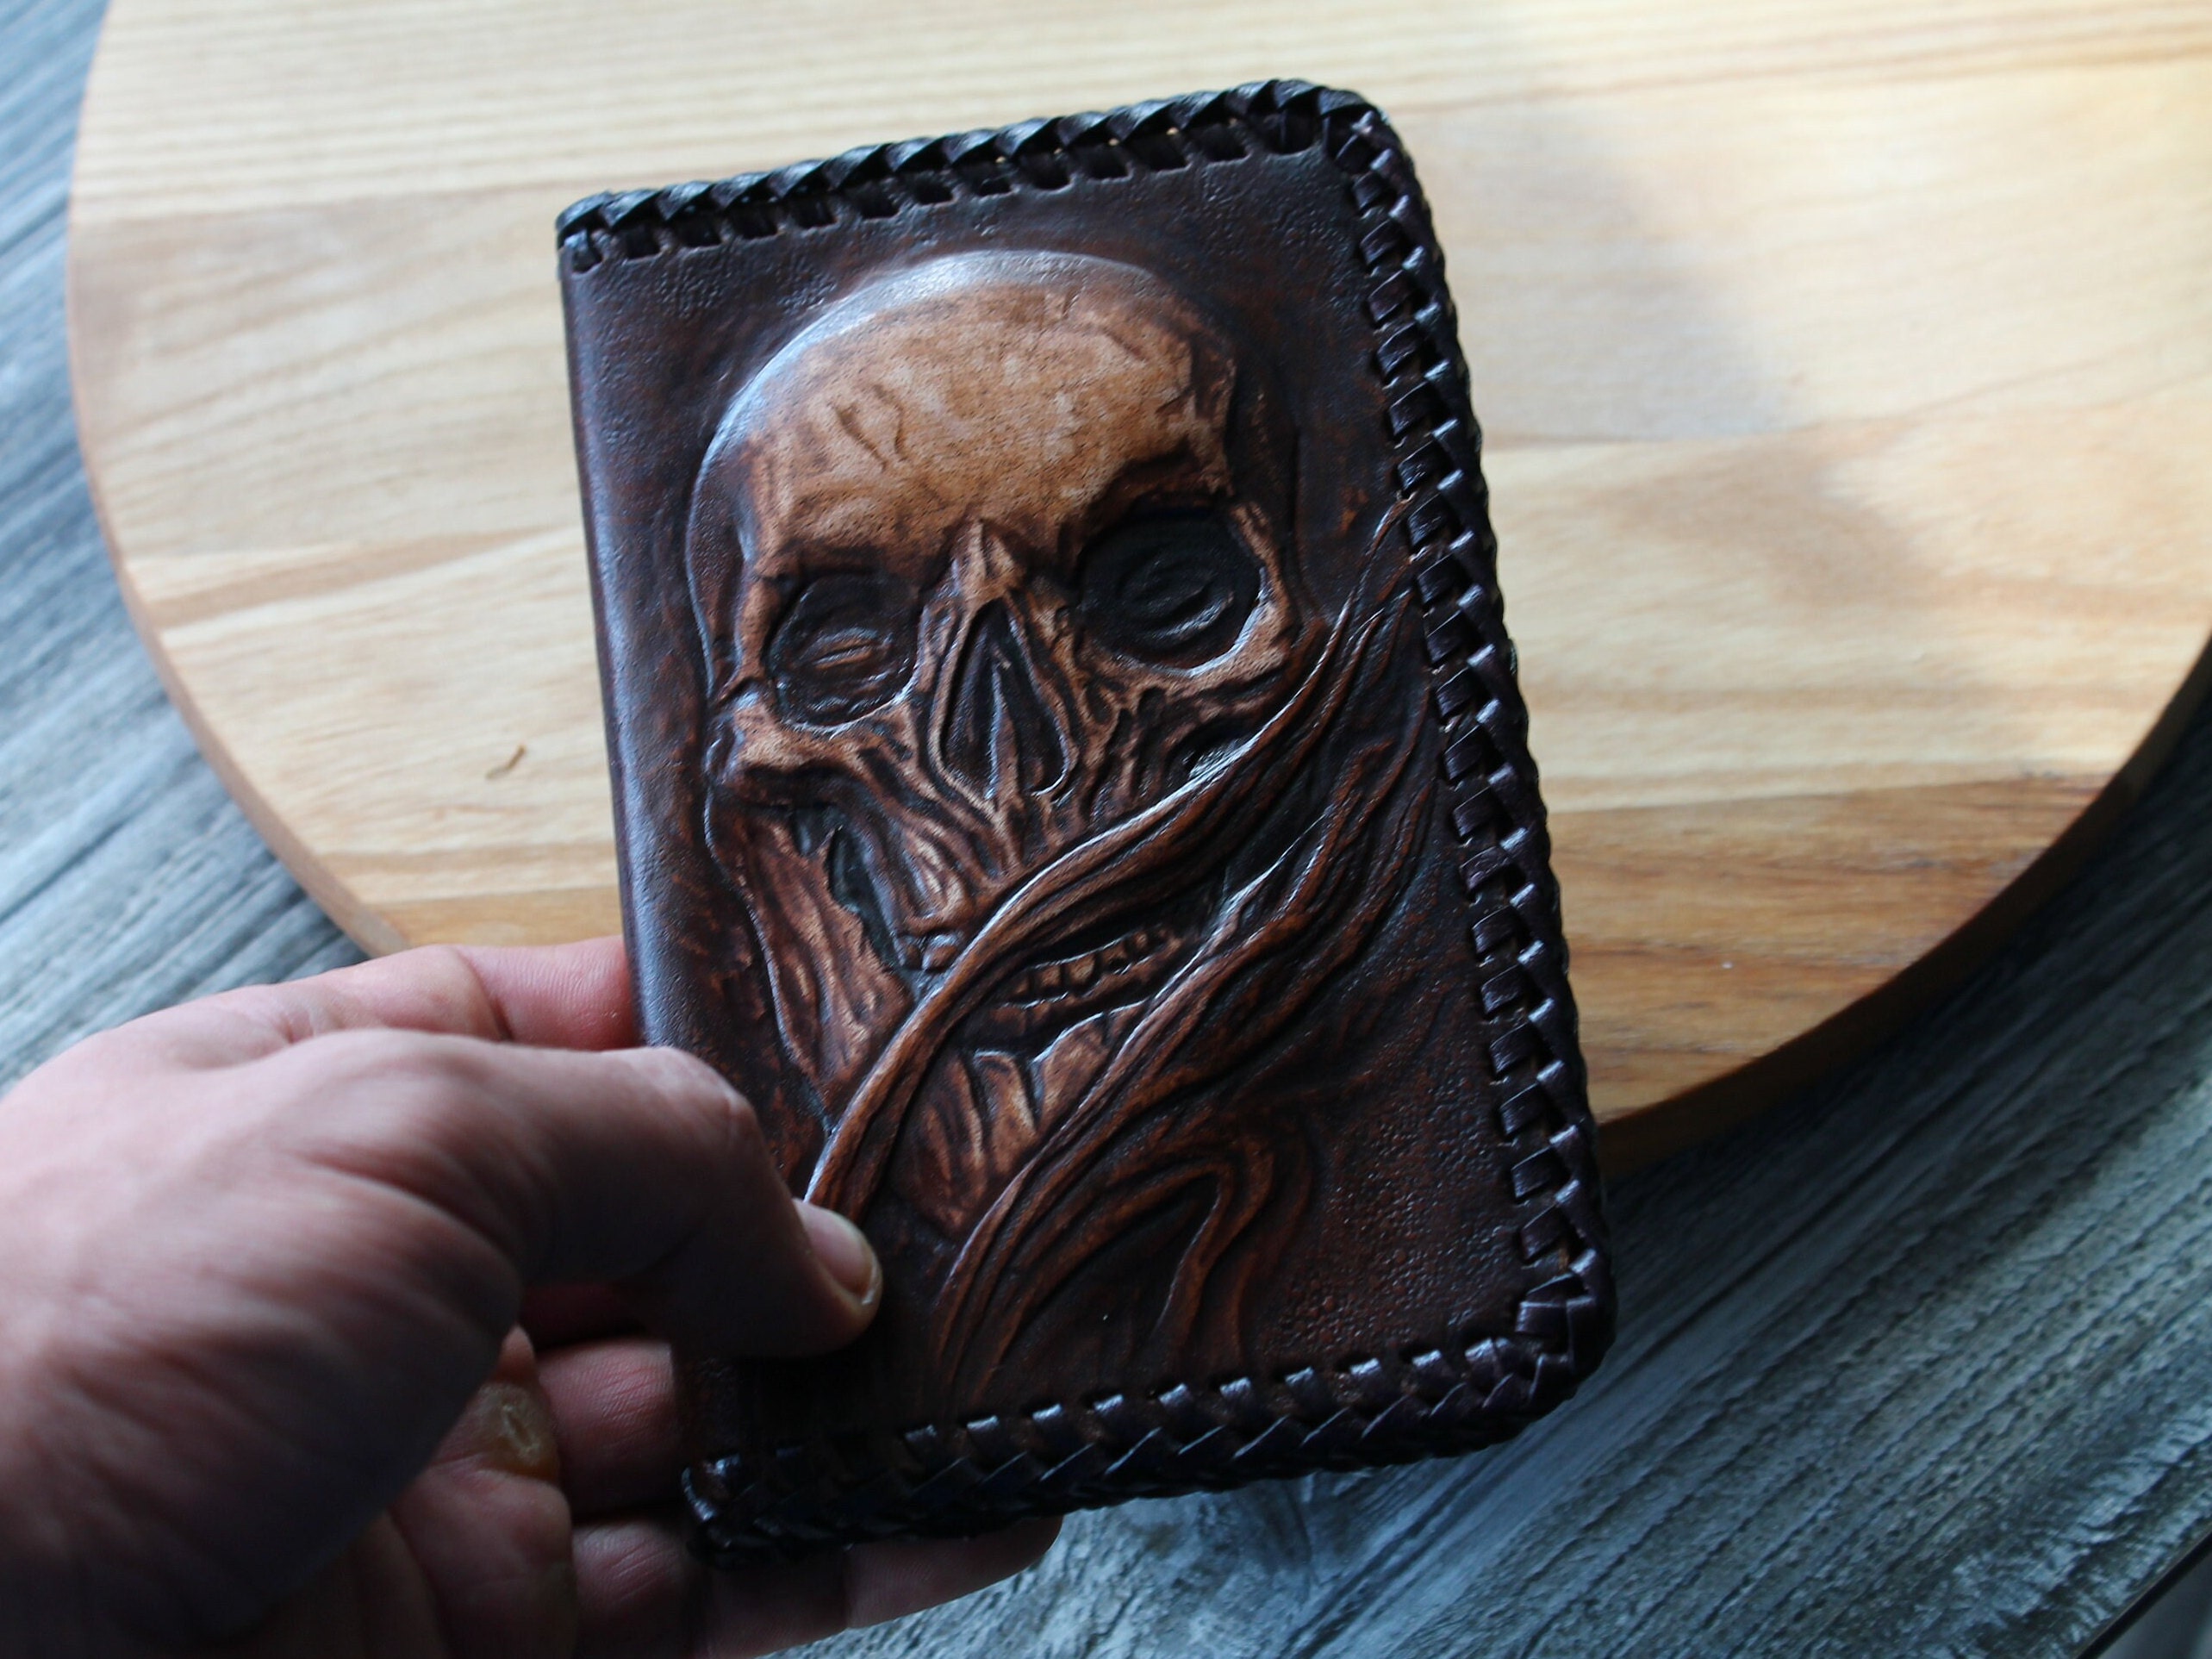 Melting Skull, Zombie, Skeleton, Men's 3D Genuine Leather Wallet, Hand-Carved, Hand-Painted, Leather Carving, Custom Wallet, Personalized Wallet